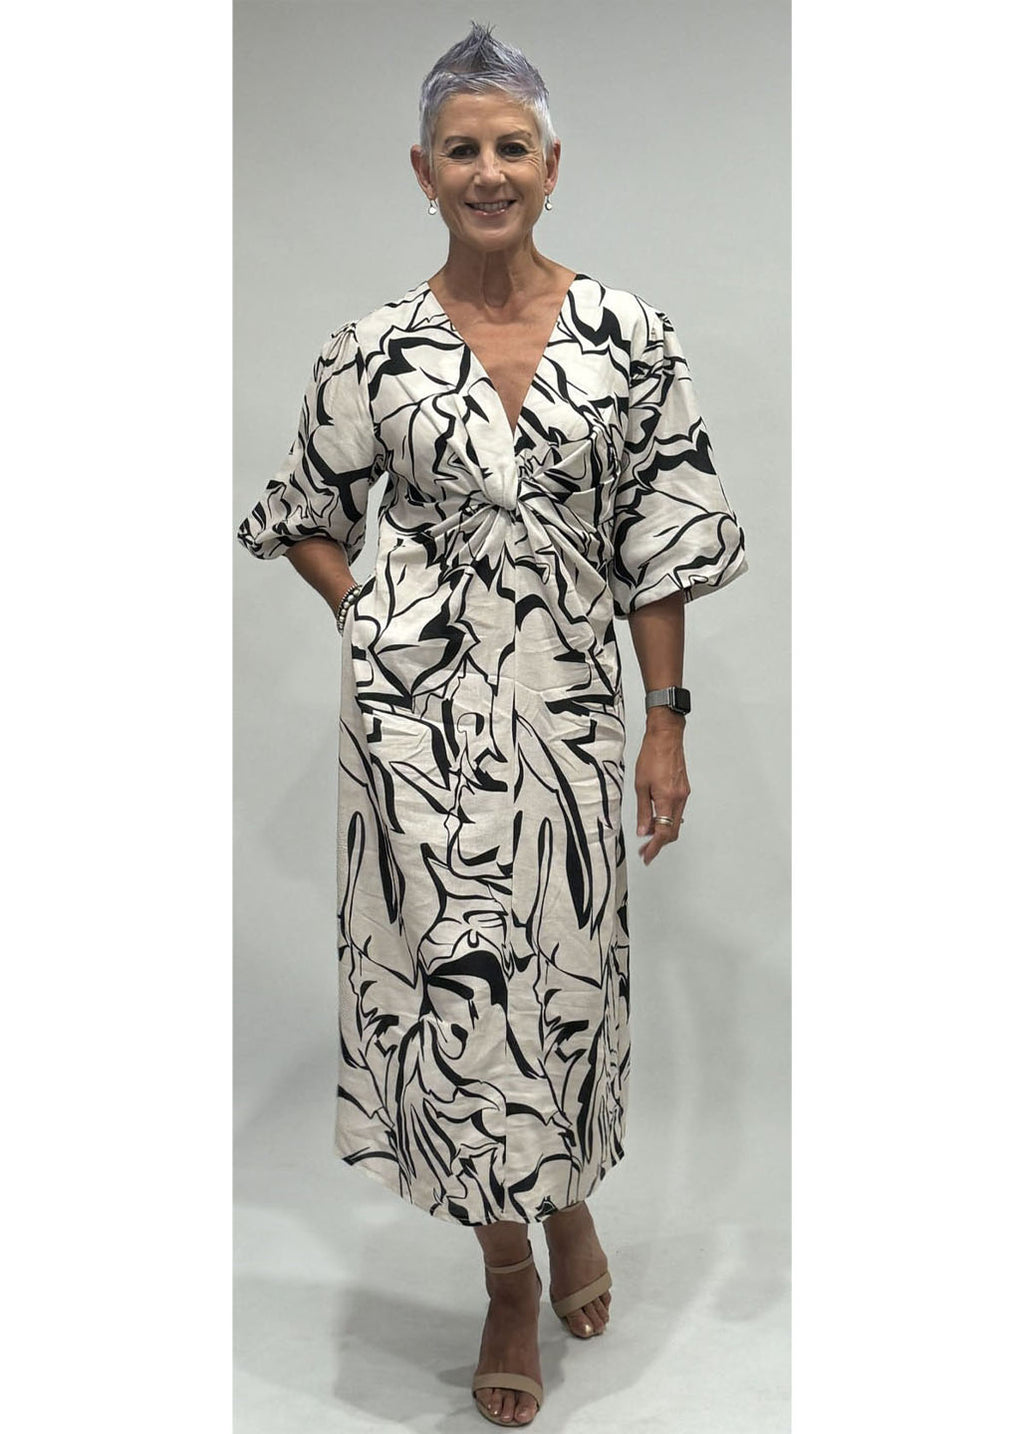 LA STRADA V NECK WITH KNOT DETAIL ABSTRACT PRINT DRESS